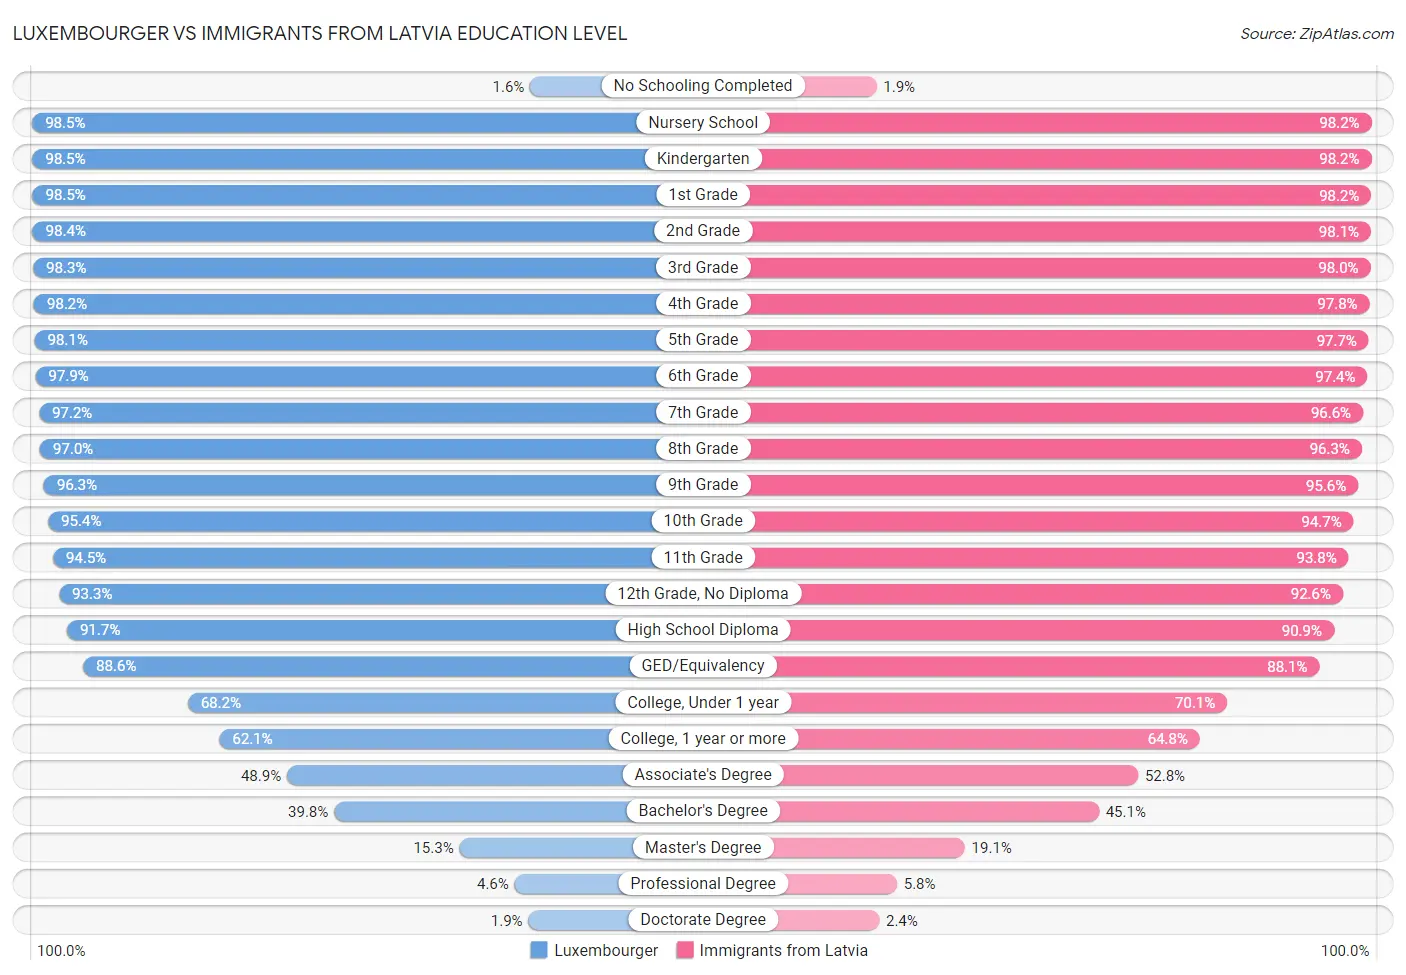 Luxembourger vs Immigrants from Latvia Education Level